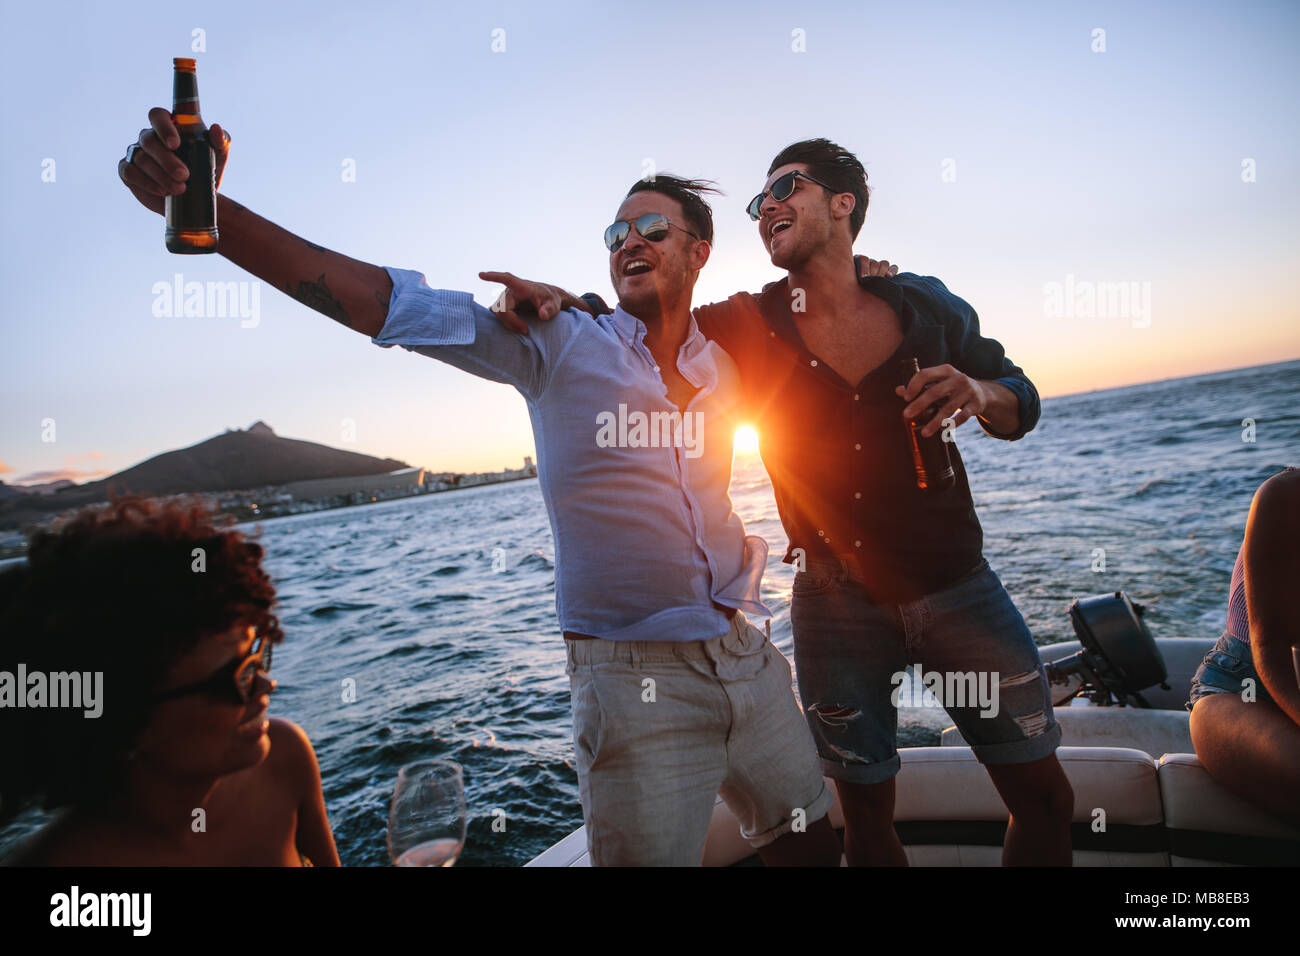 Men having a great time at boat party at sunset. Friends partying on a yacht with drinks. Stock Photo